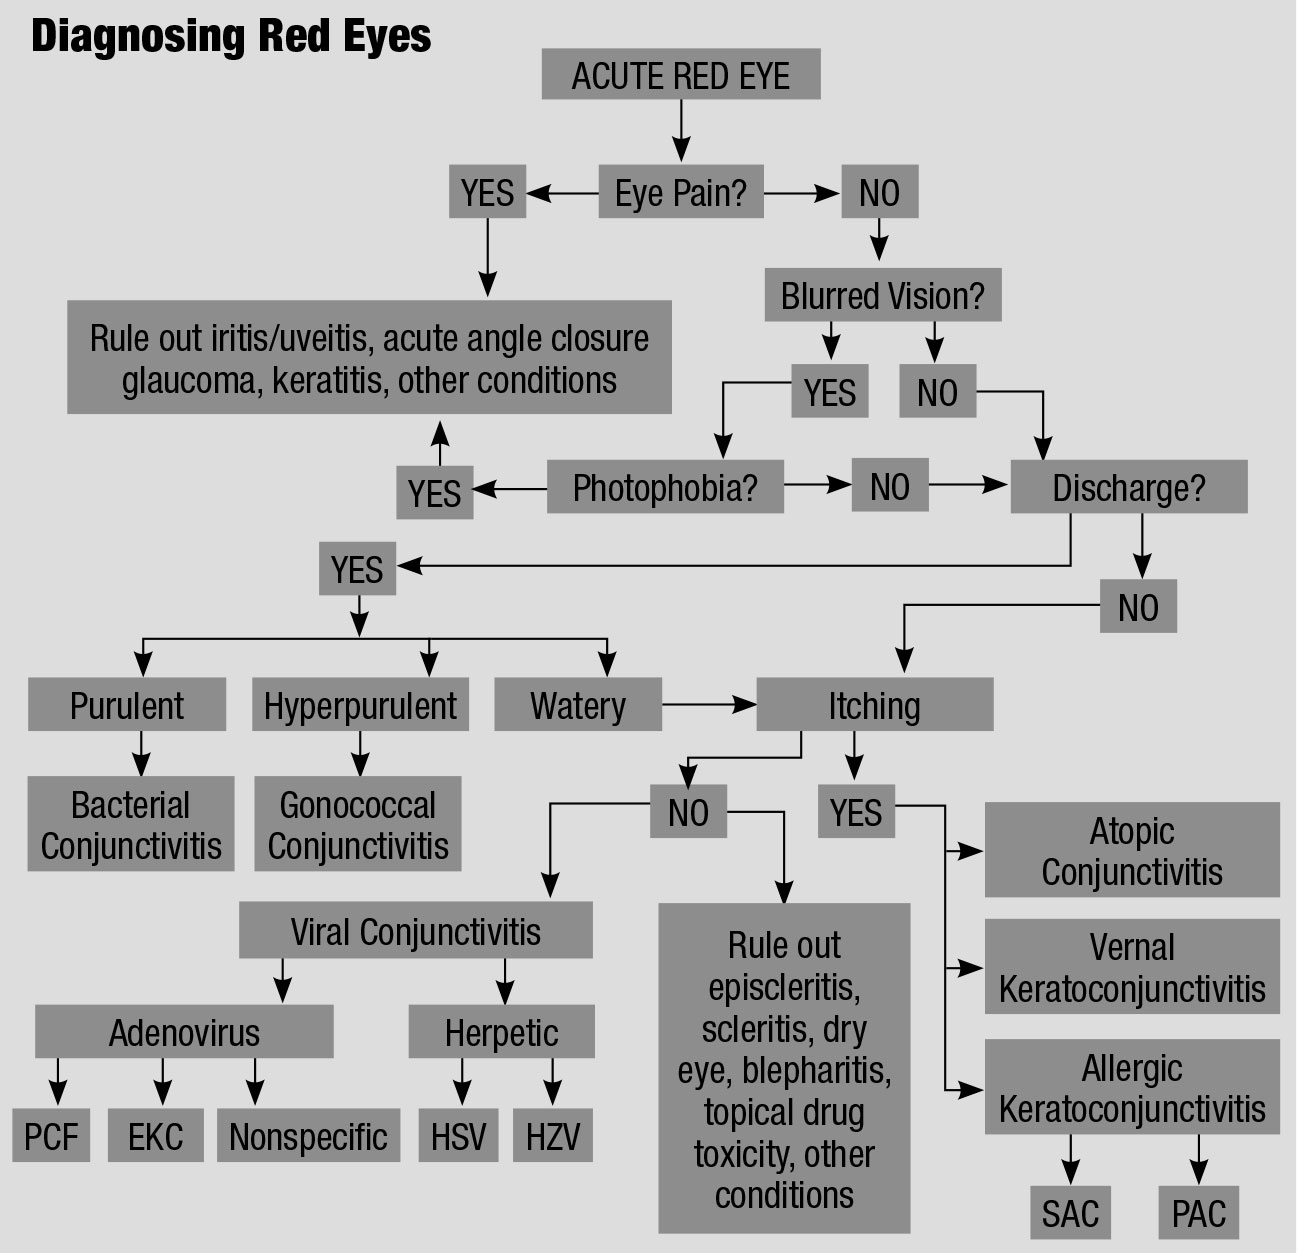 This flowchart for the differential diagnosis of a red eye, adapted from various sources, explains an orderly approach to treating these irritated patients.